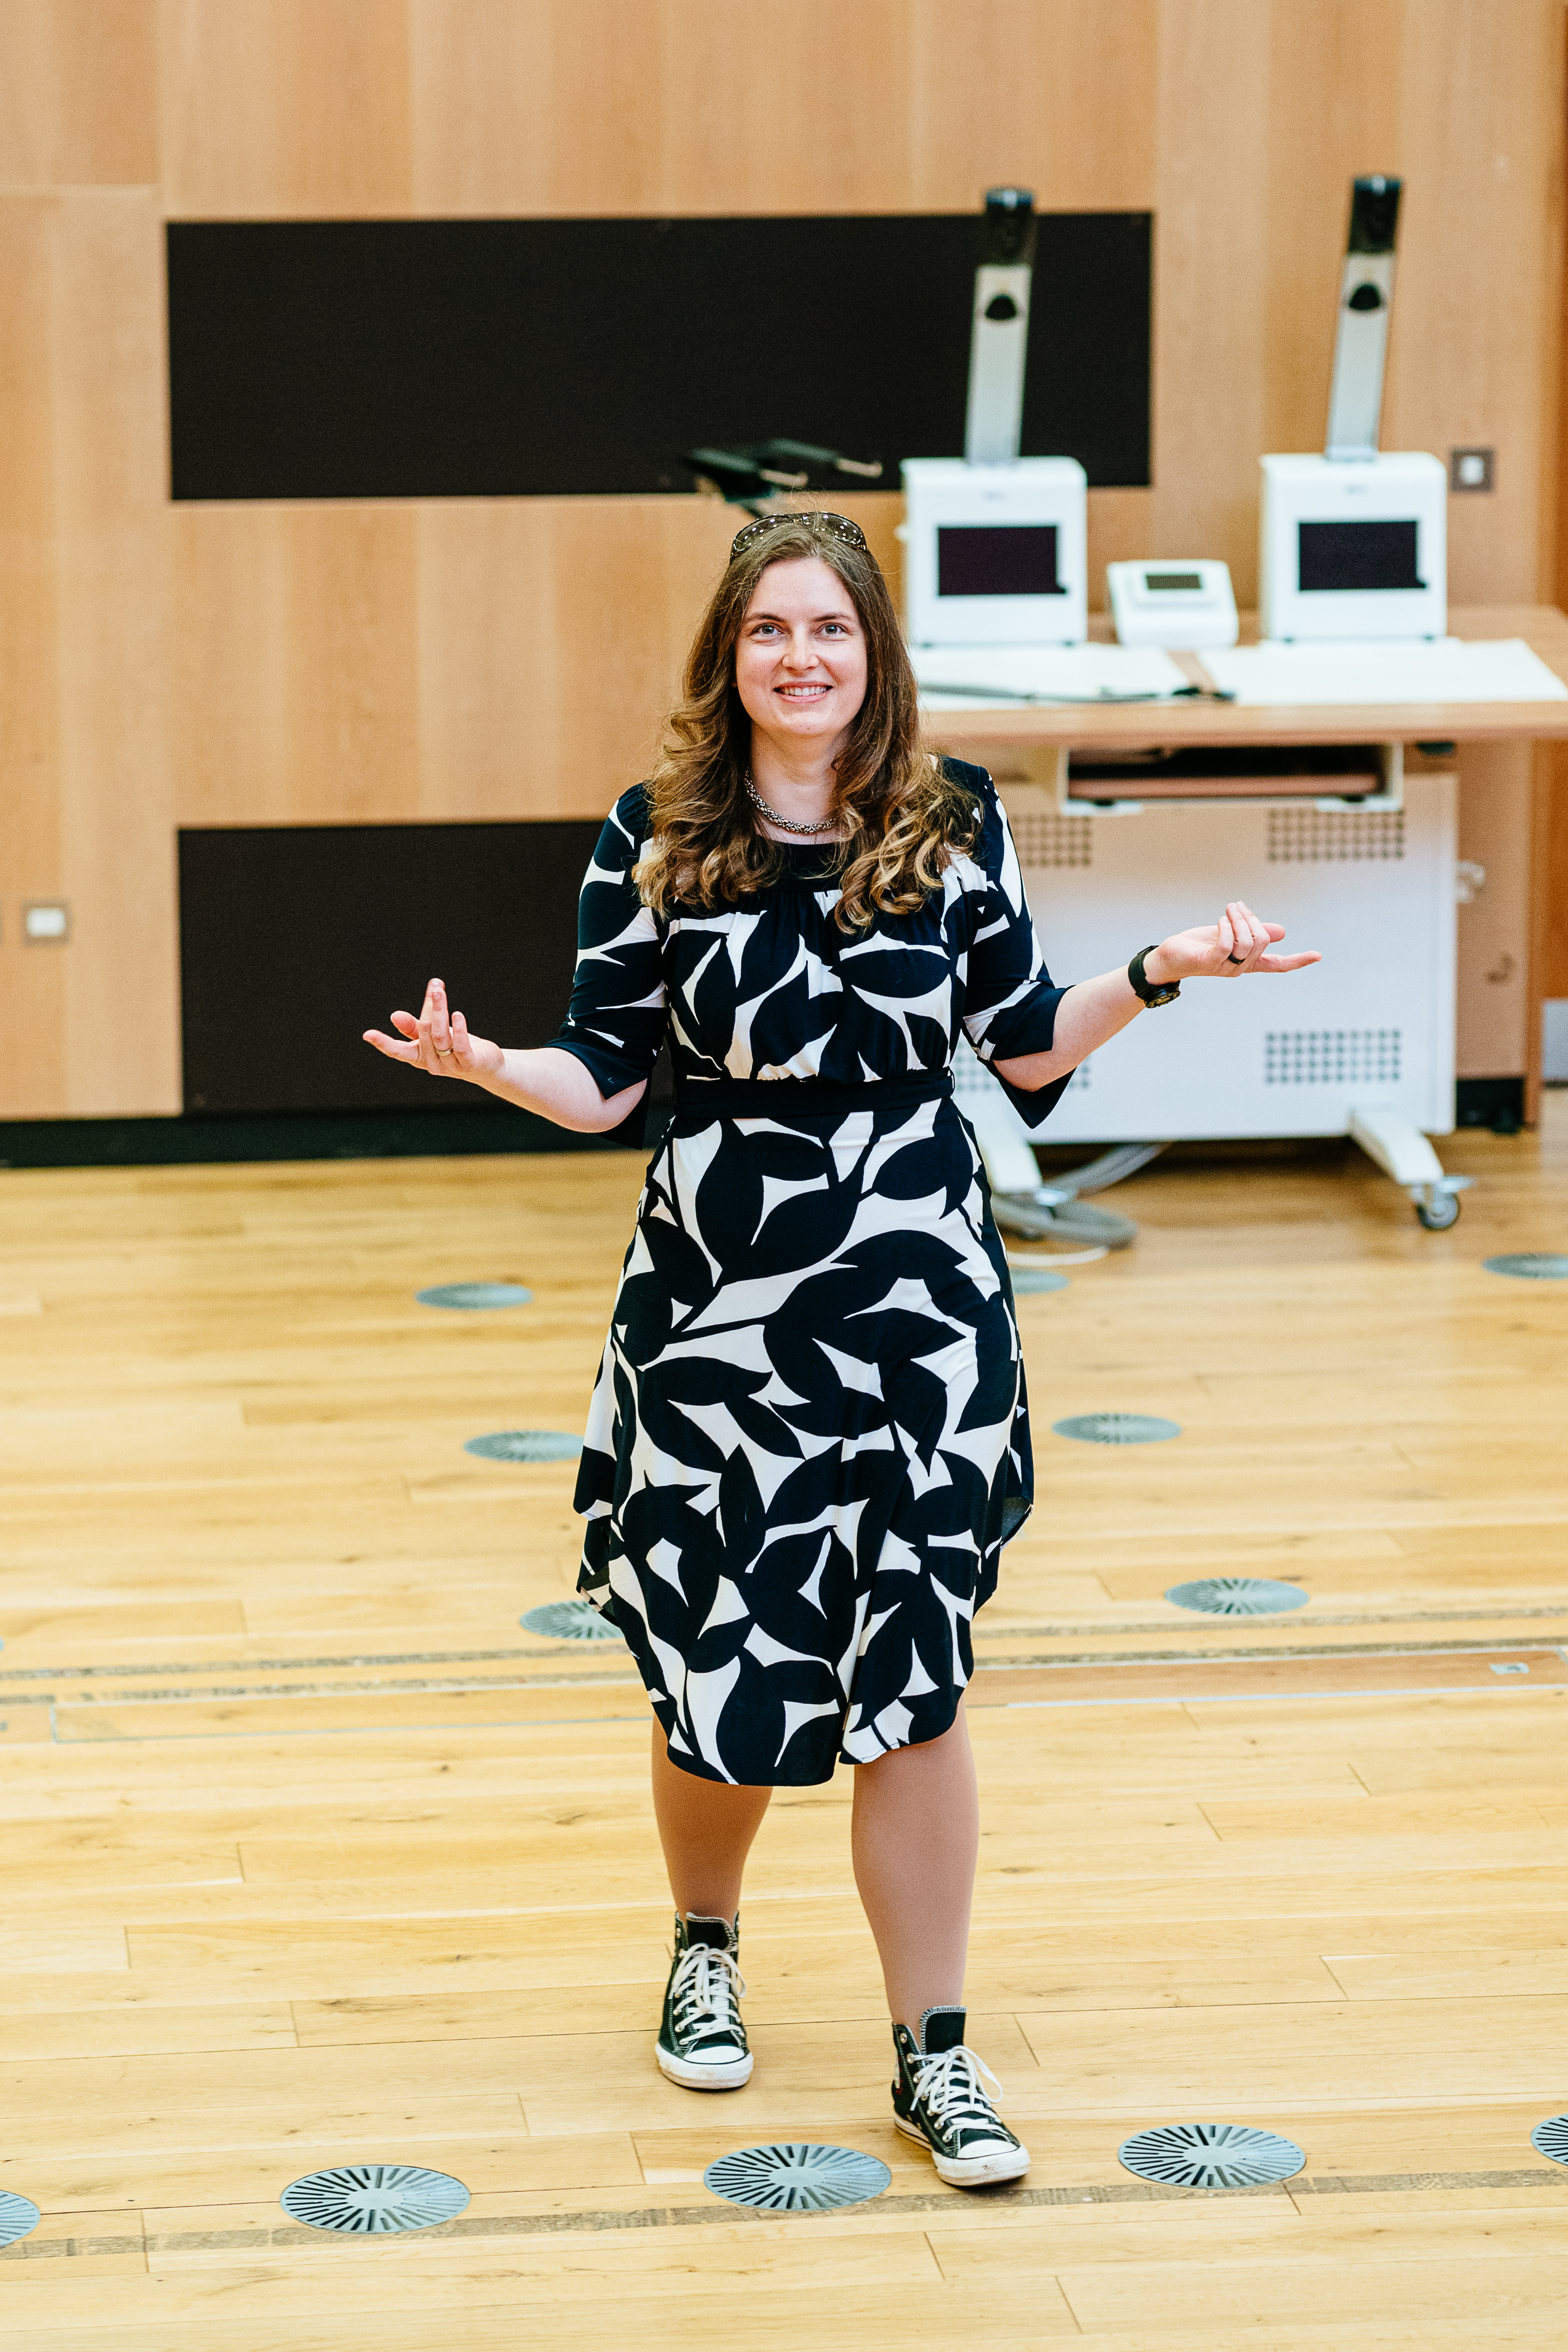 Anica is standing large lecture hall. she wears a black and white dress with black and white Converse shoes. She holds her arms out to the side and is mid step smiling